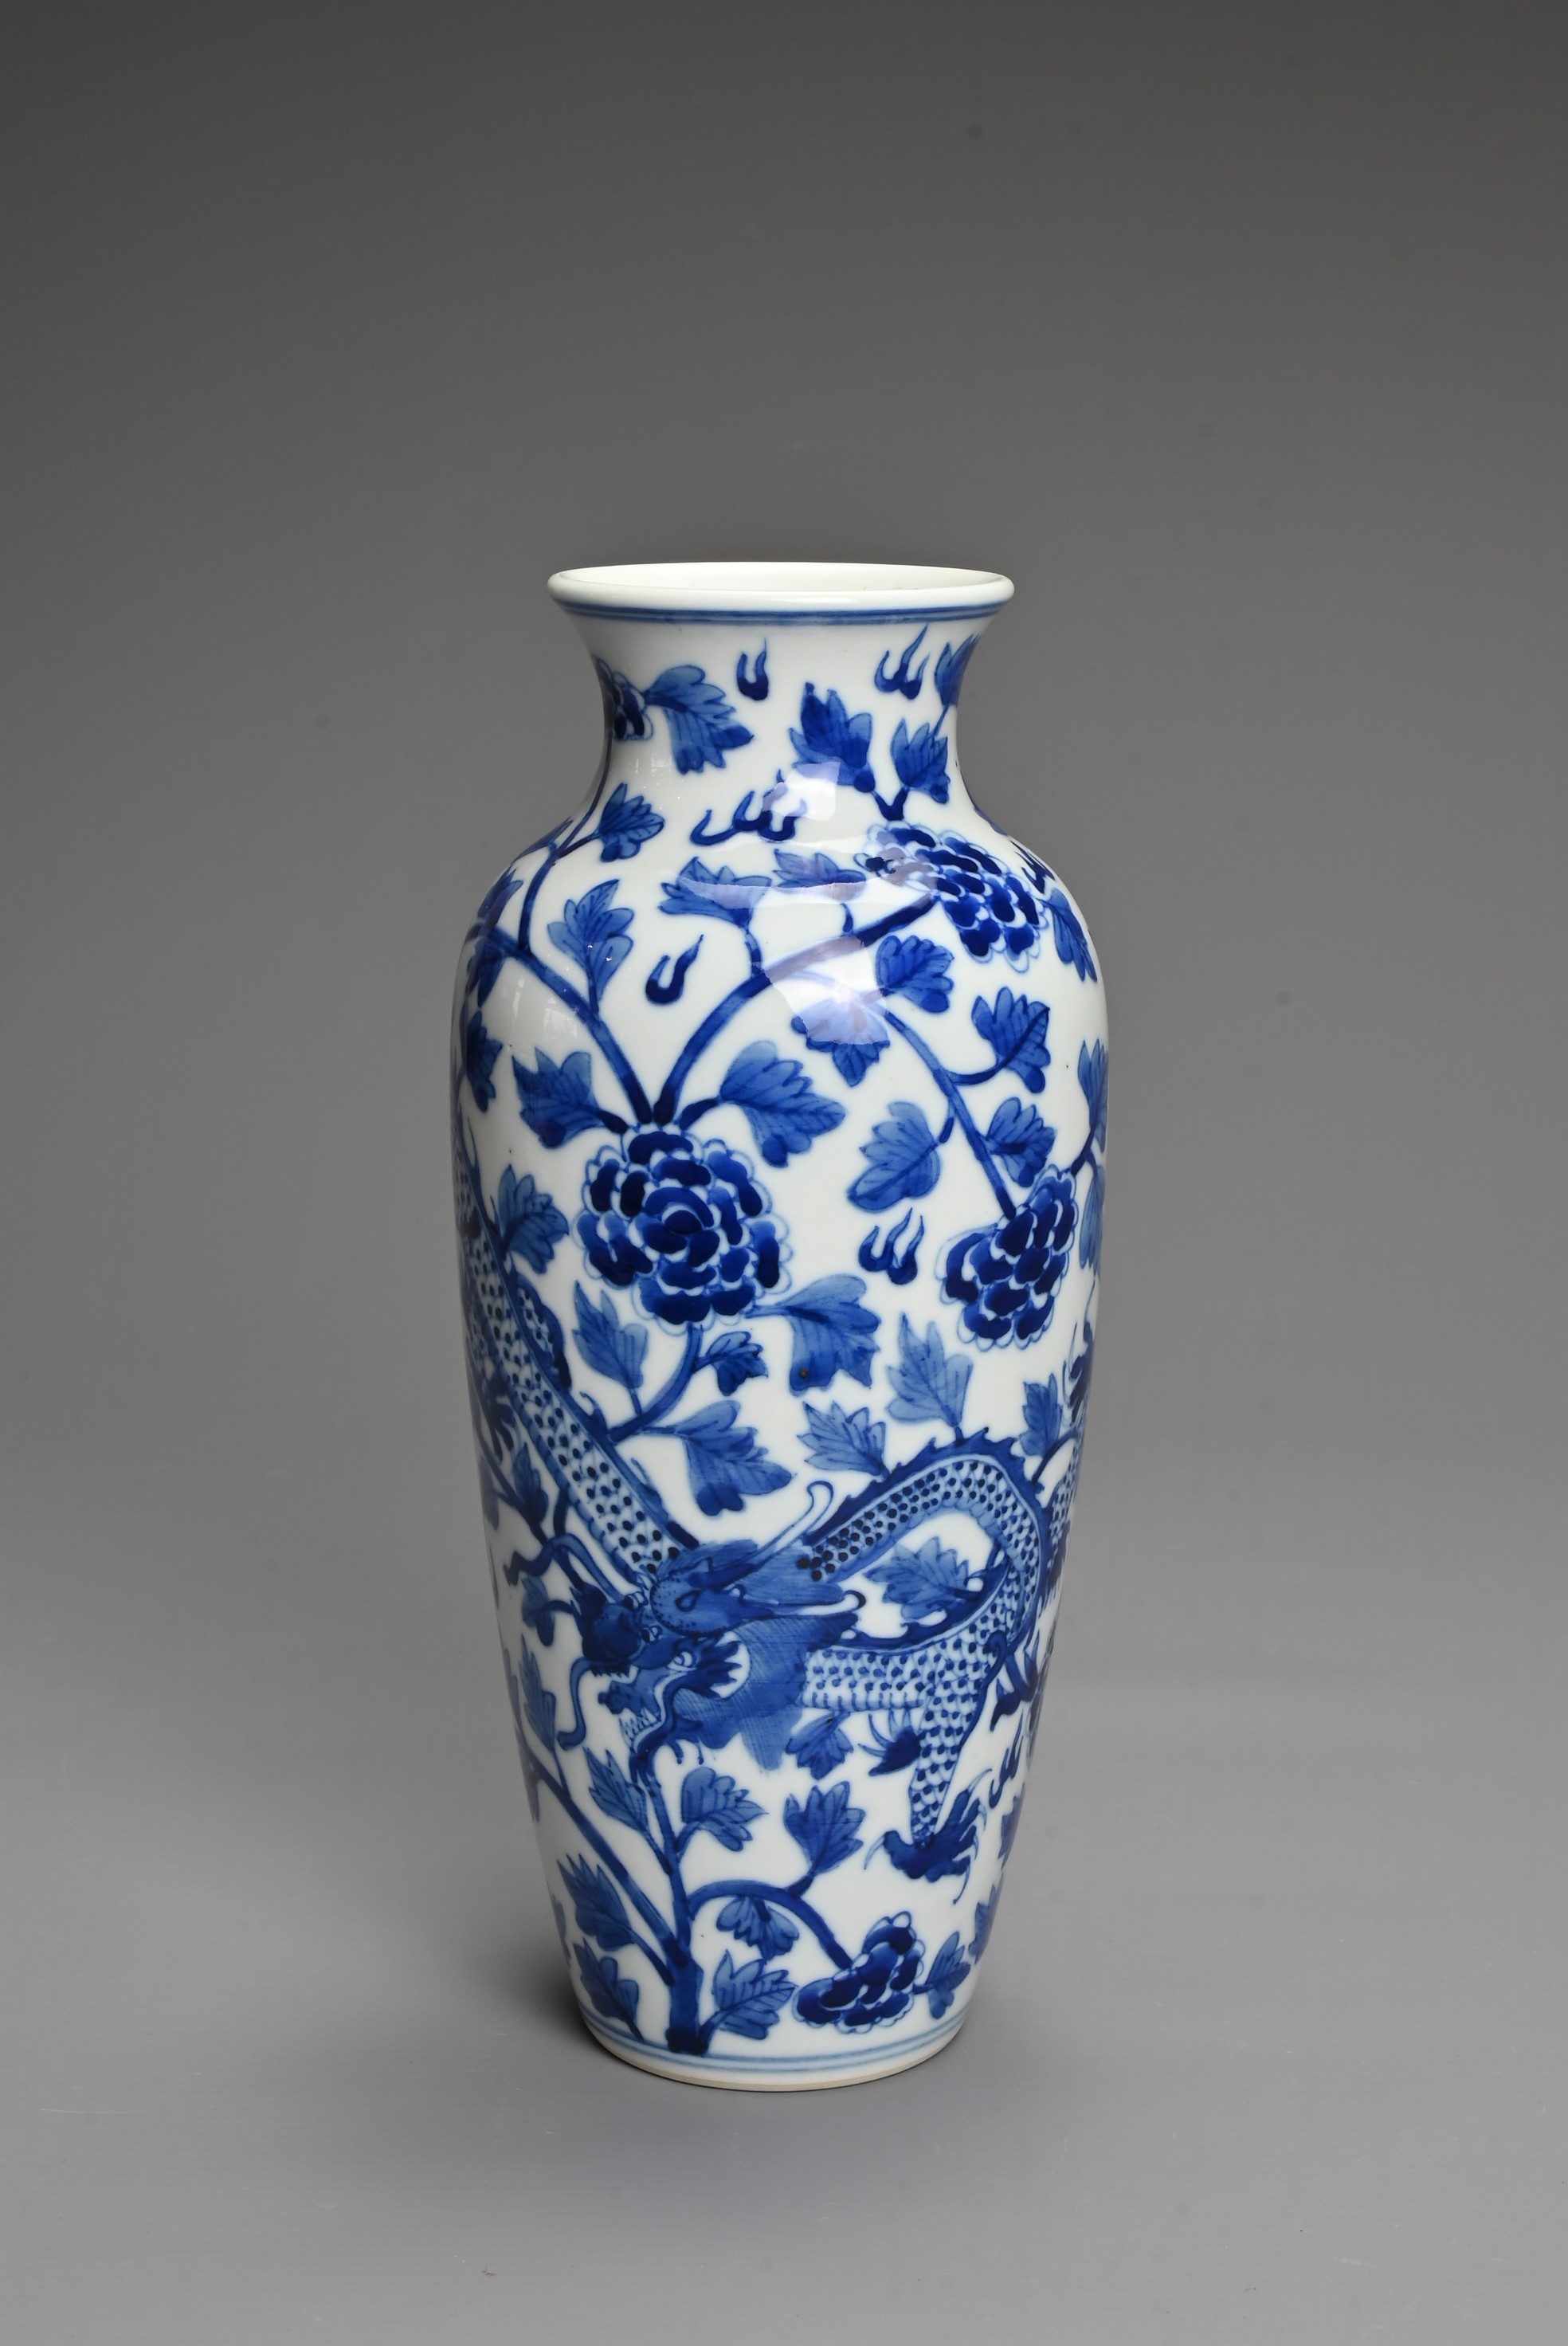 A CHINESE BLUE AND WHITE PORCELAIN VASE. Decorated with a dragon and leafy peony scrolls with flat